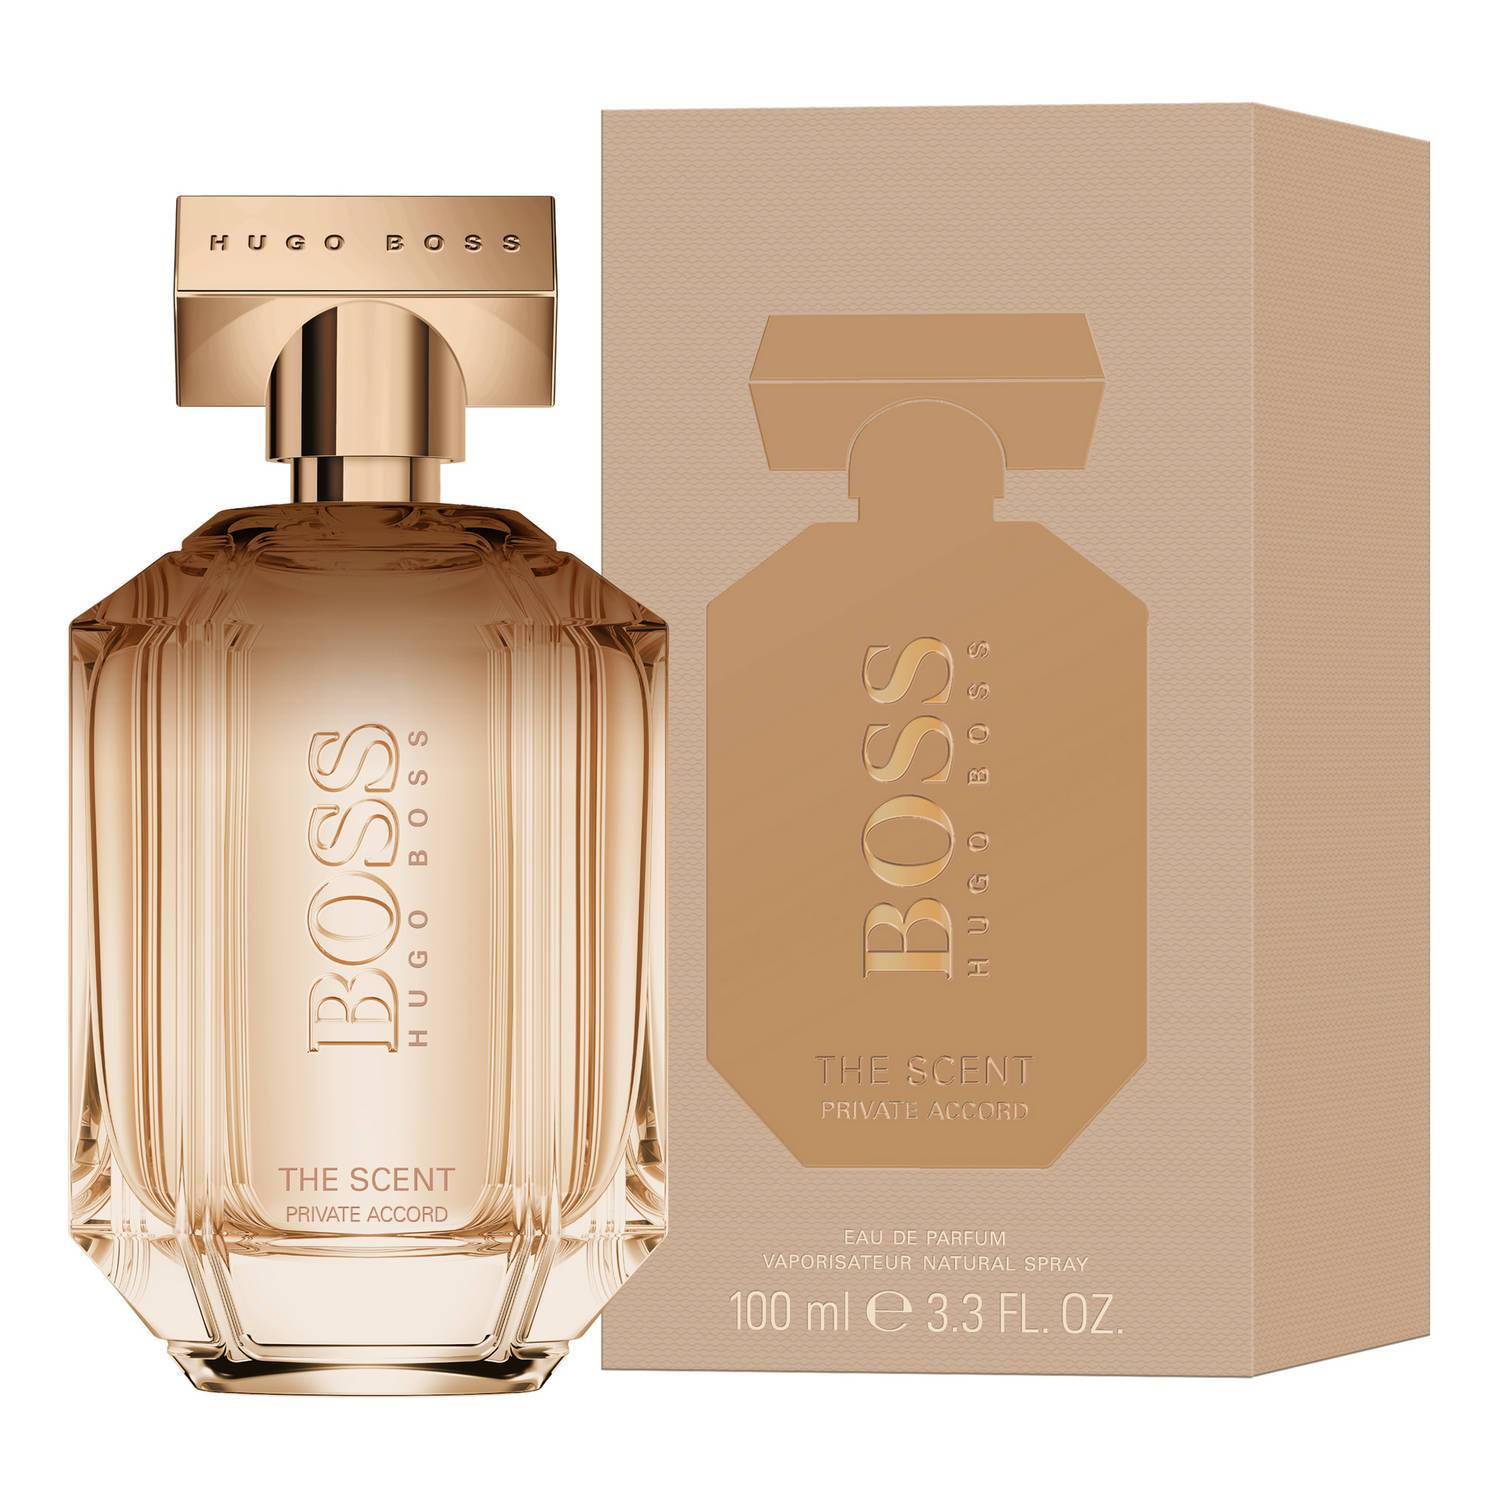 The Scent Private Accord for Her eau de parfum. Addictive cocoa absolute pulses at the heart of BOSS The Scent Private Accord for Her, while the freshness of sweet mandarin and captivating osmanthus contrast with warm tonka.